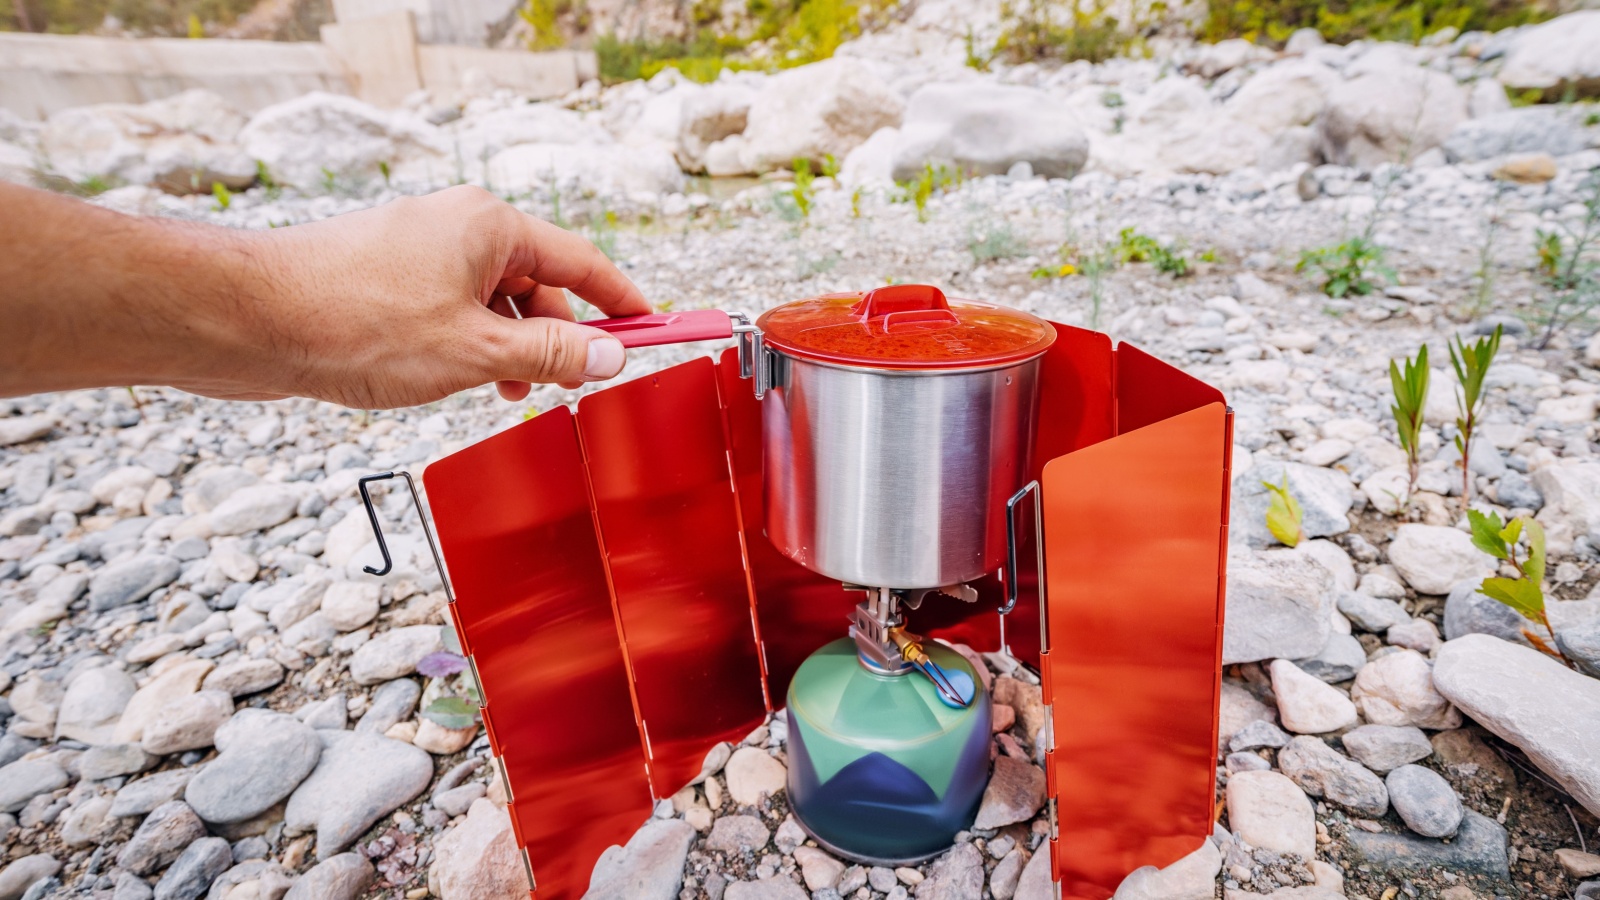 camping stove with wind screen shield. Cooking hiking food